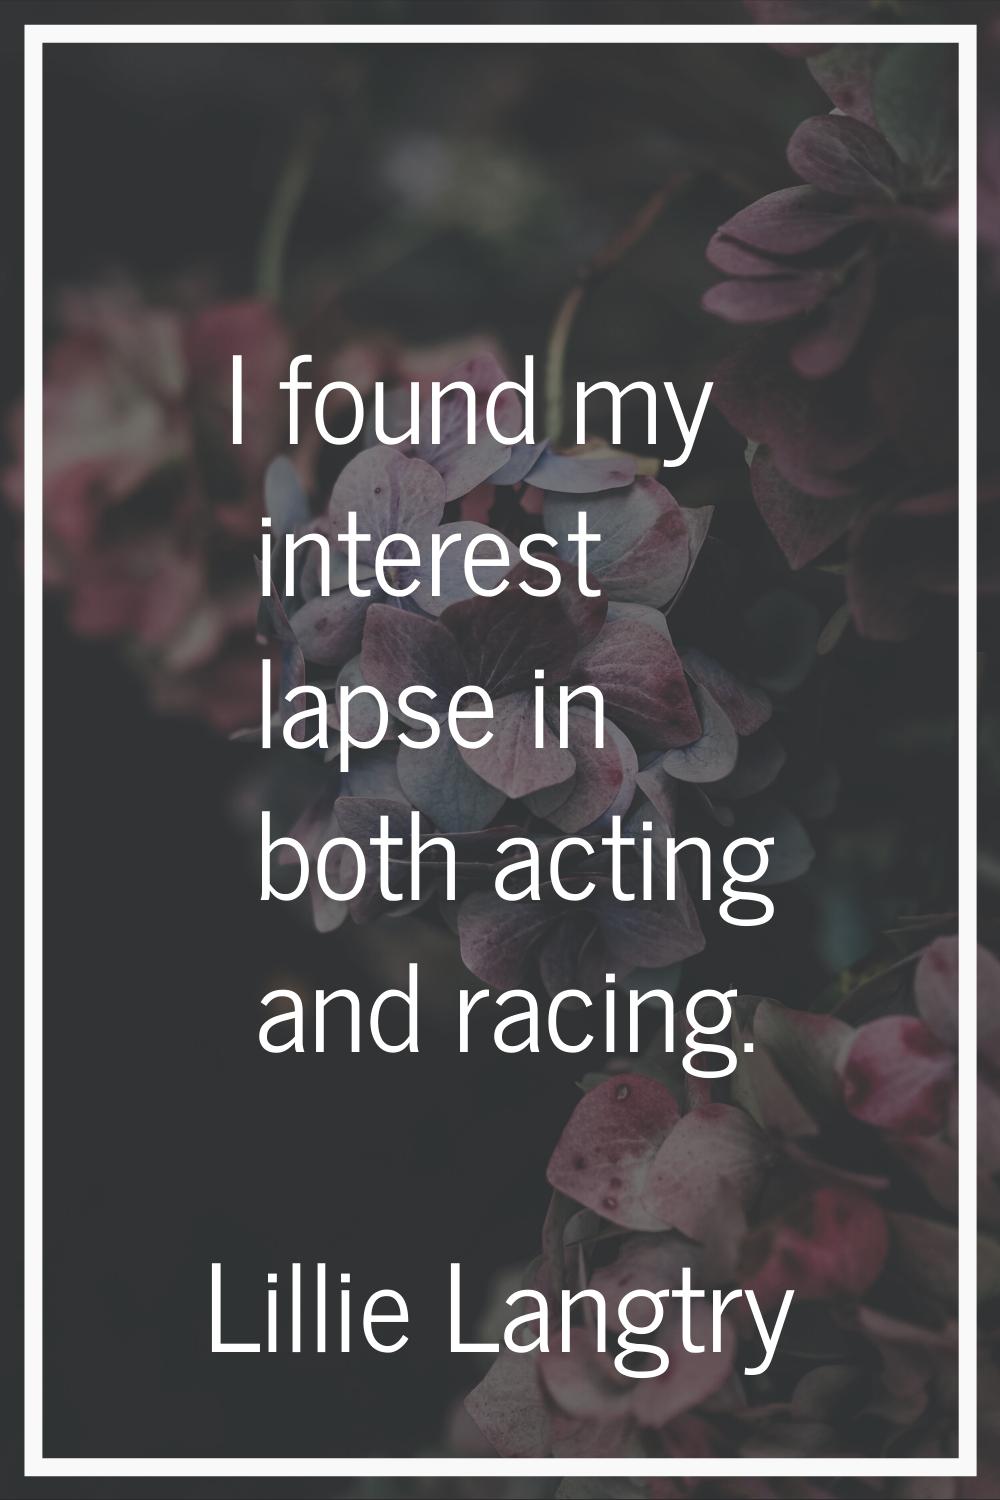 I found my interest lapse in both acting and racing.